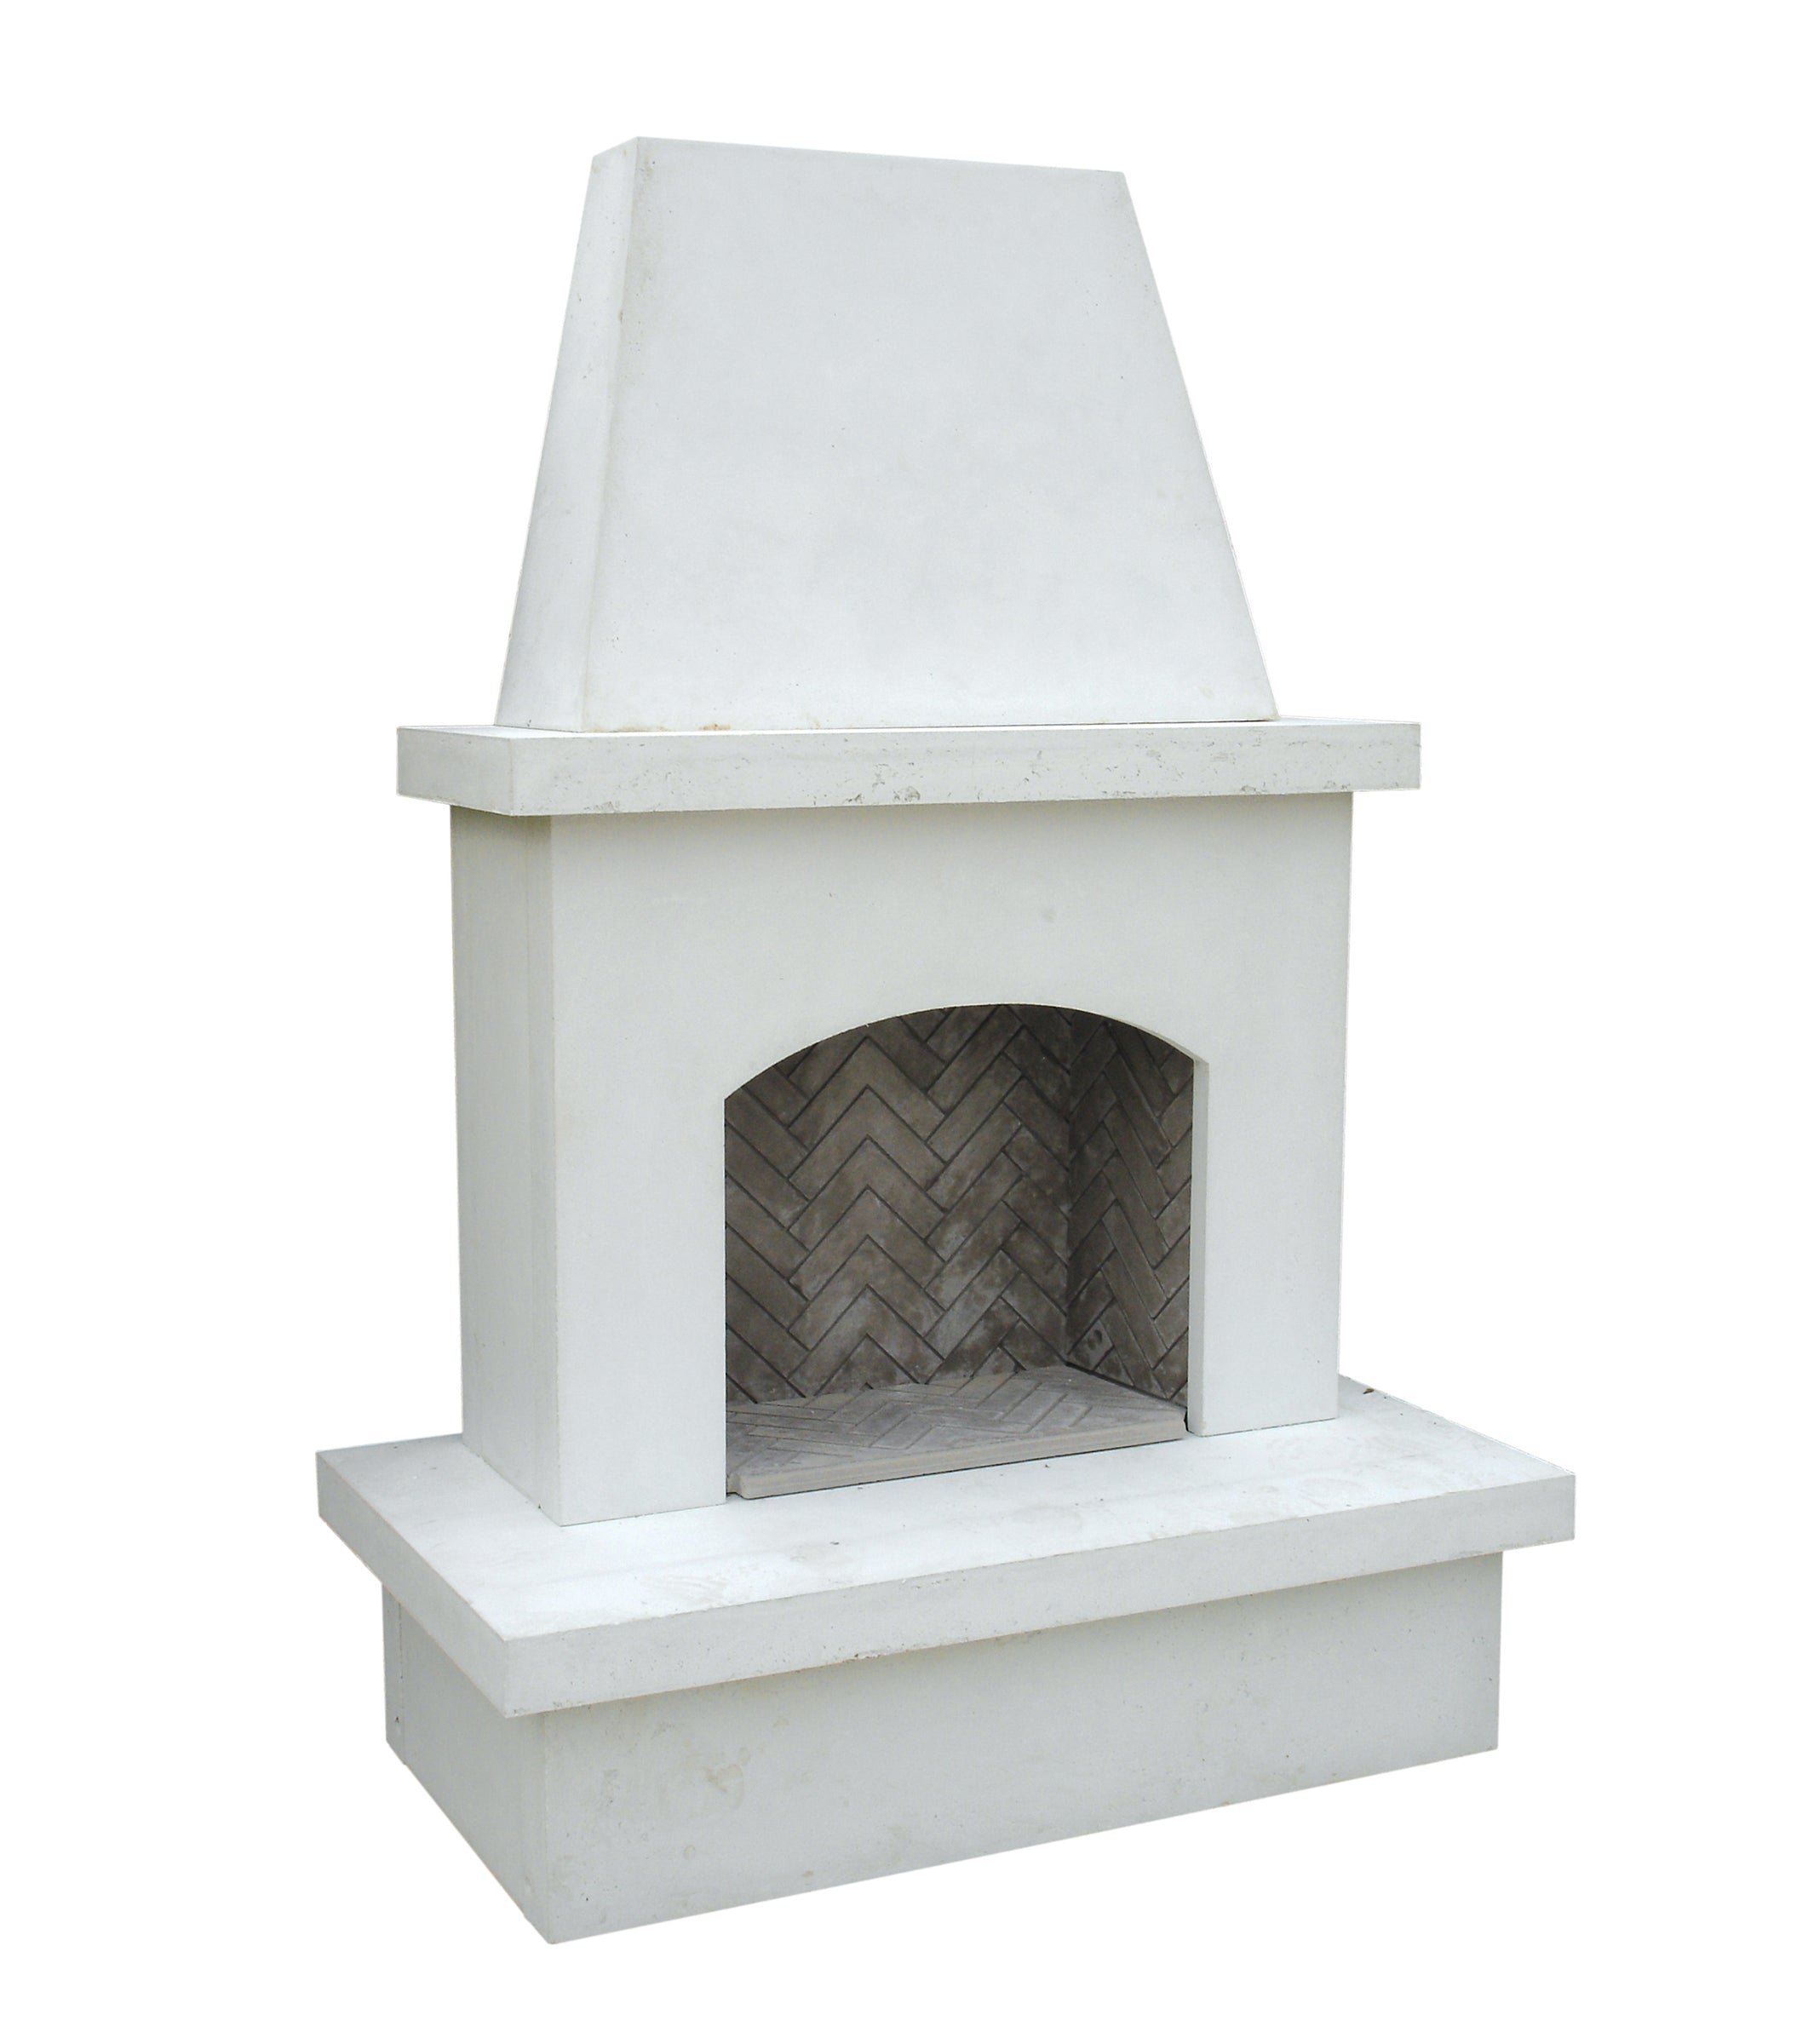 Contractor's Model Outdoor Gas Fireplace by American Fyre Designs